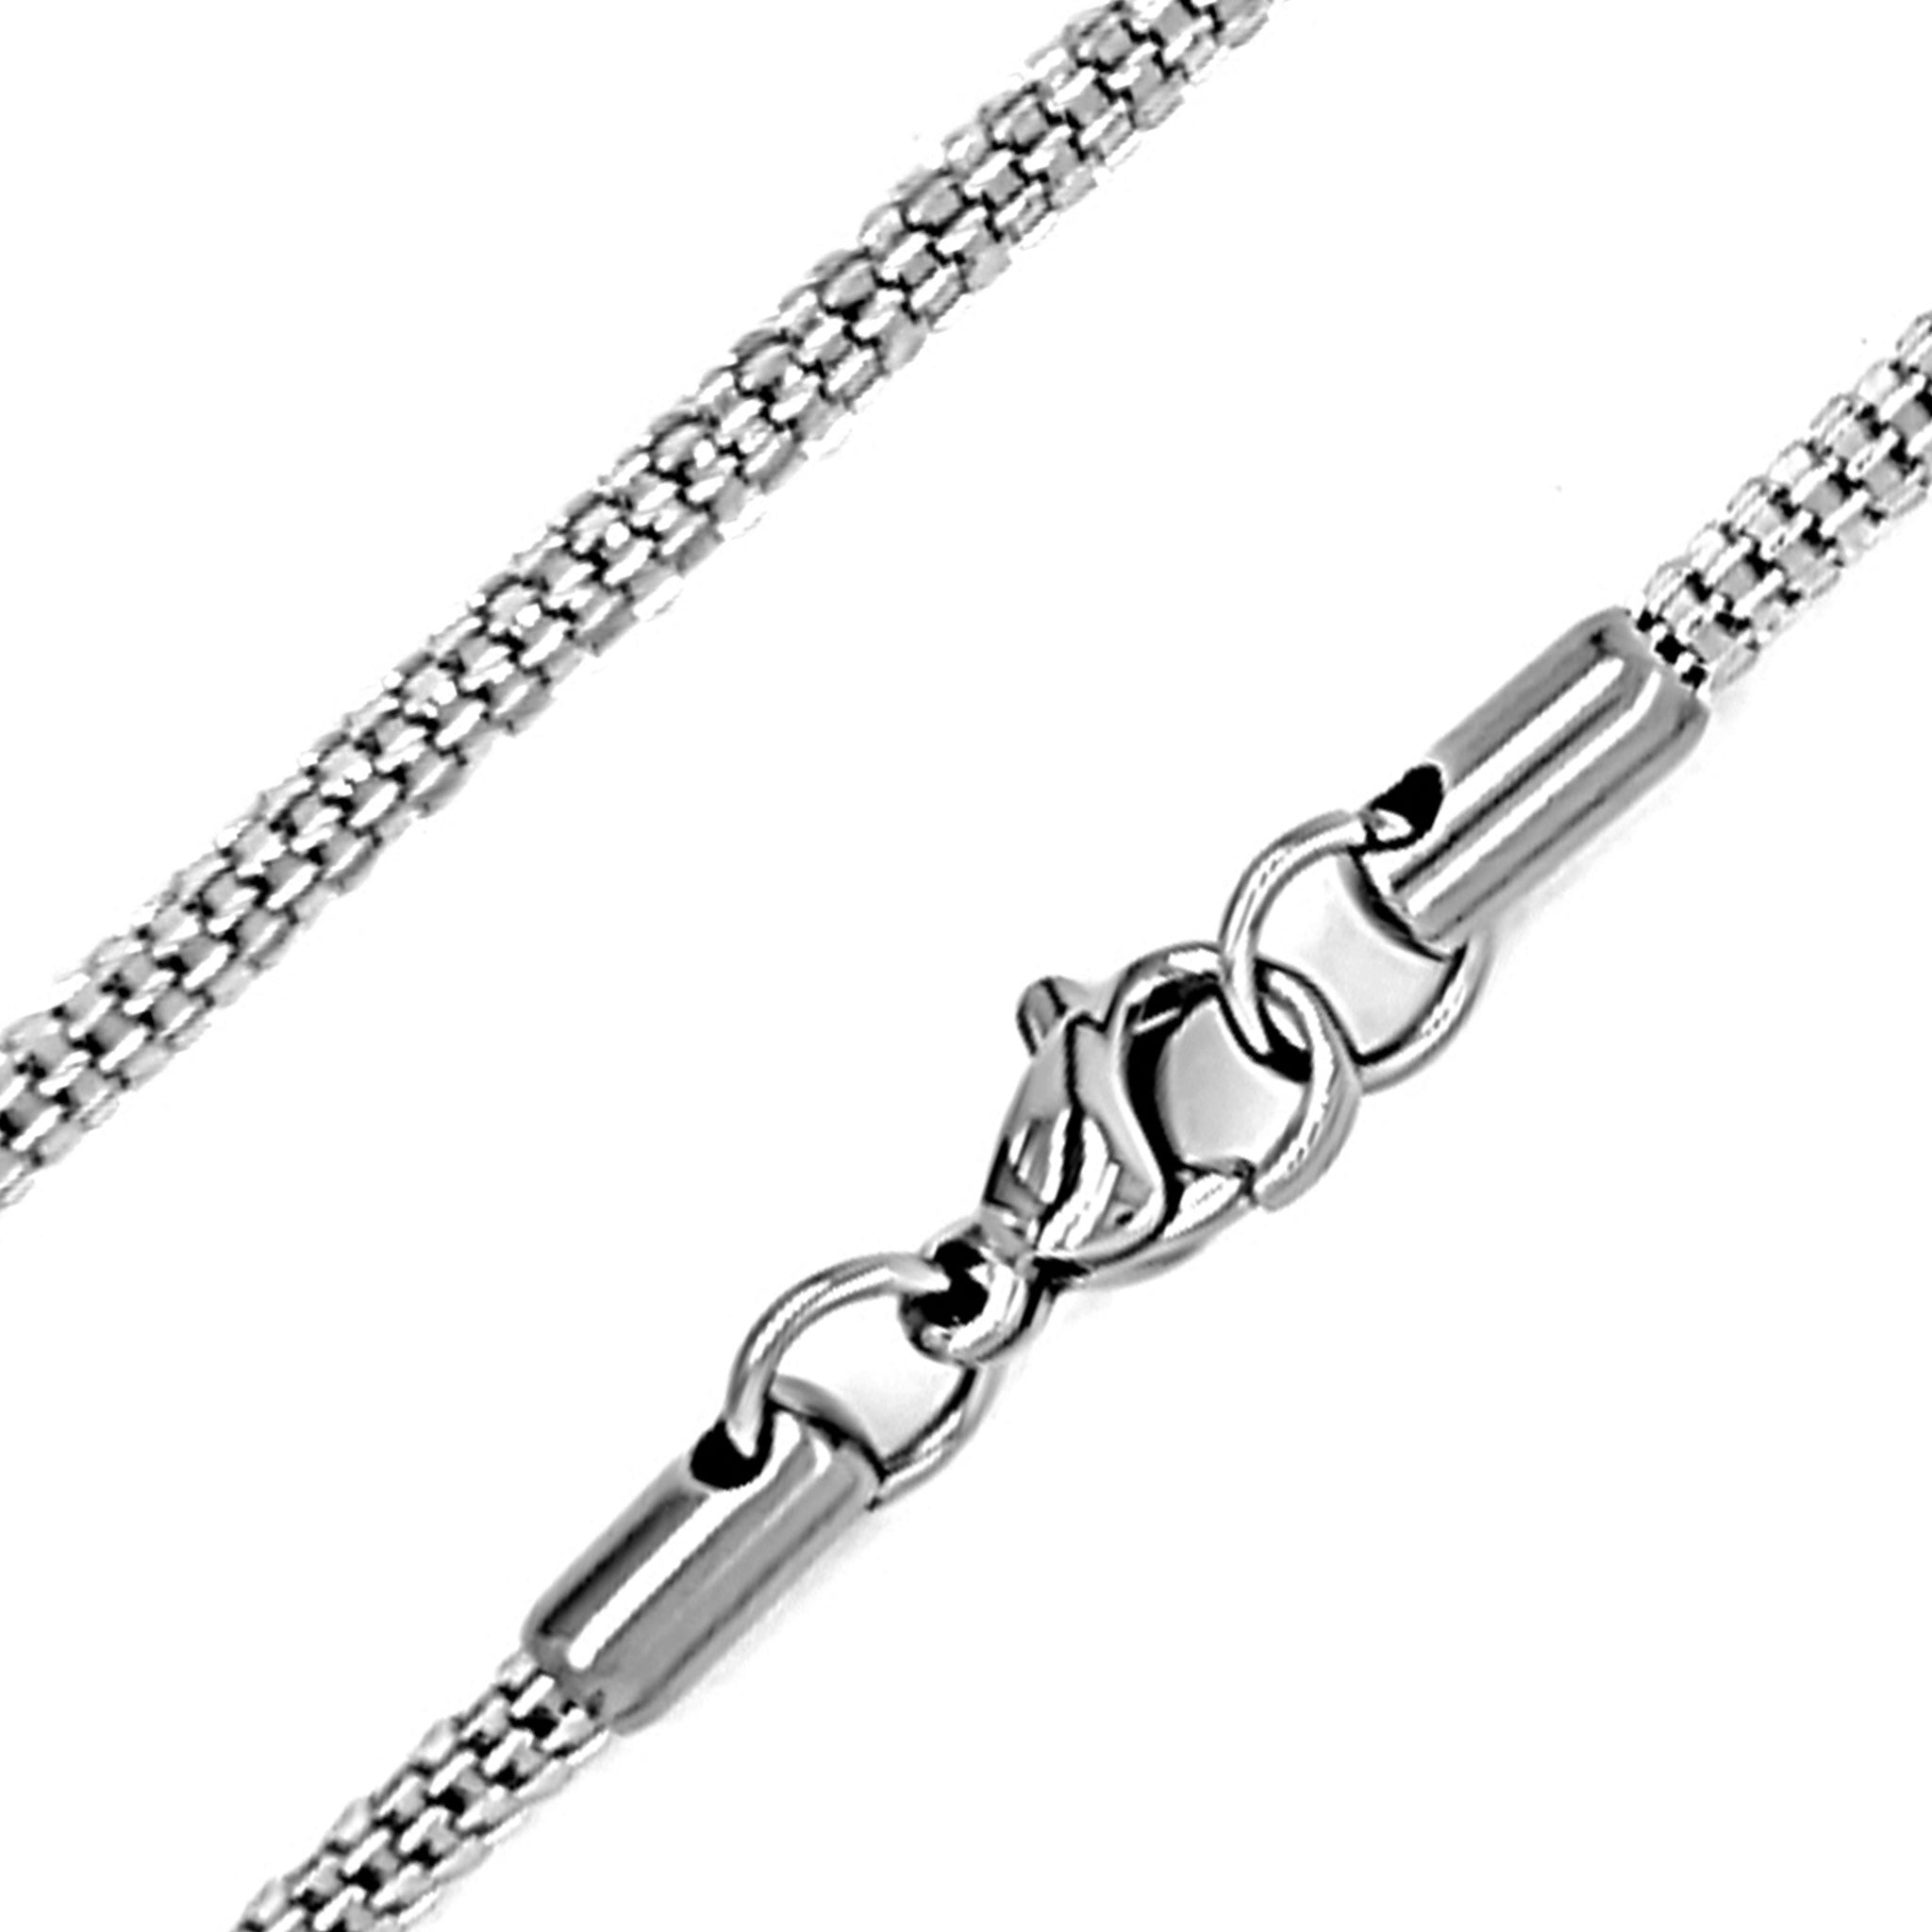 Stainless Steel Round Snake Chain Necklace / NKJ2504-womens stainless steel jewelry- stainless steel cleaner for jewelry- stainless steel jewelry wire- surgical stainless steel jewelry- women's stainless steel jewelry